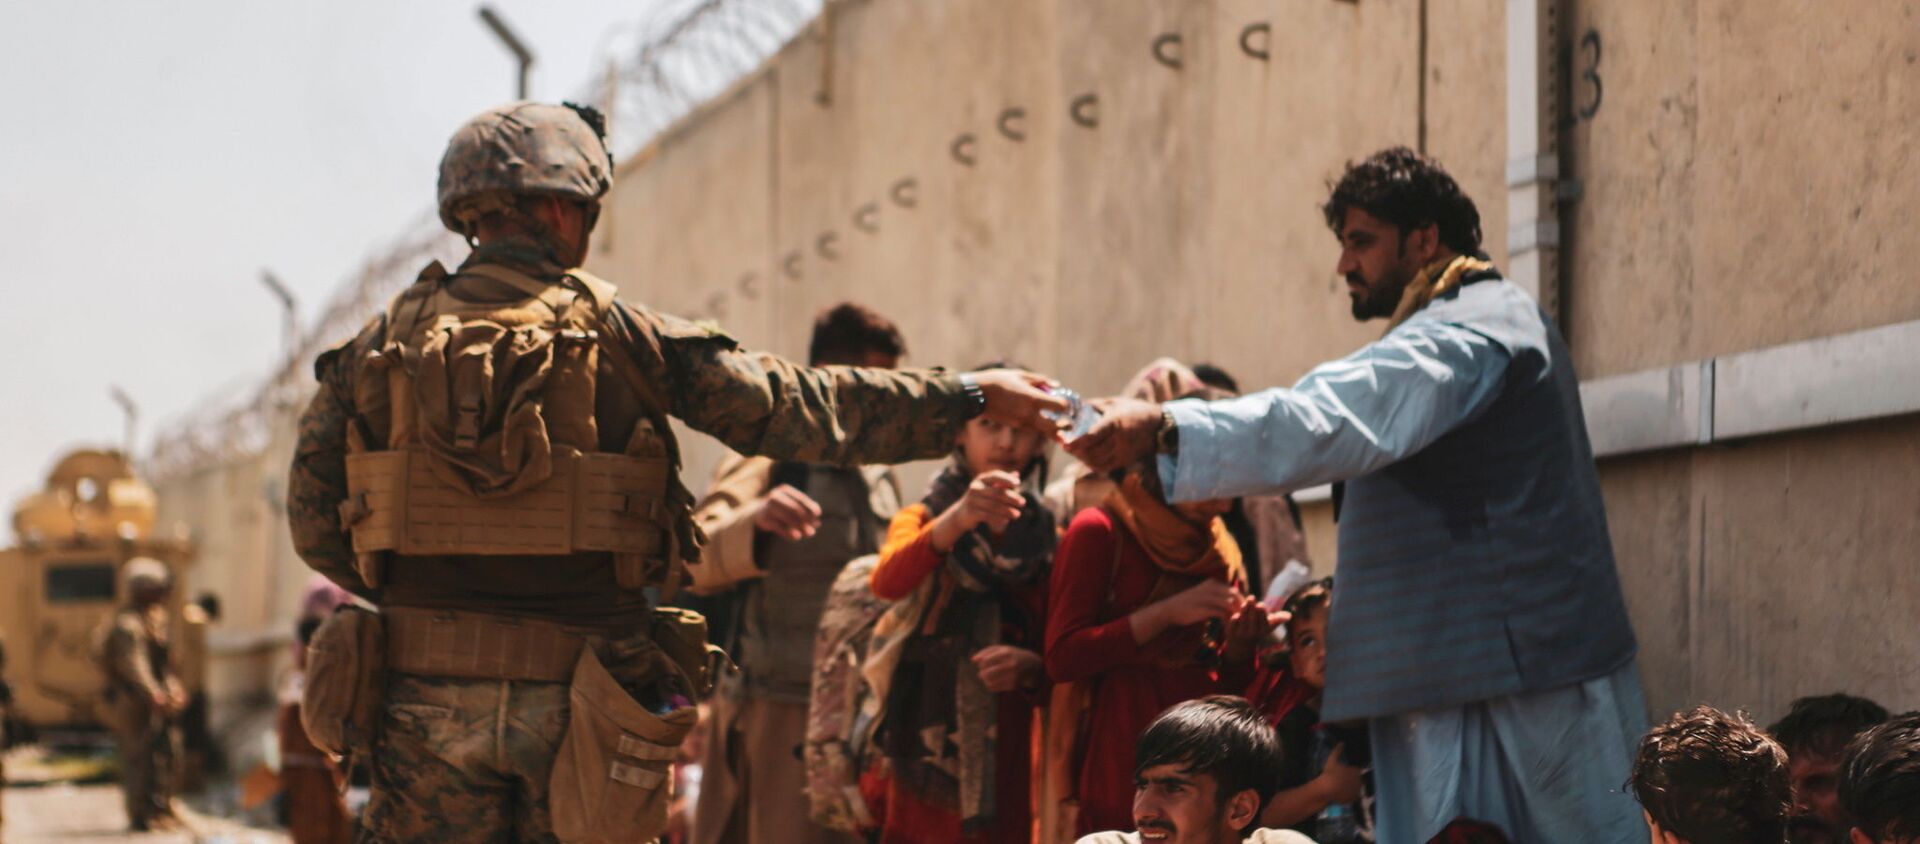 A US Marine passes out water to evacuees during an evacuation at Hamid Karzai International Airport, Kabul, Afghanistan, August 22, 2021 - Sputnik International, 1920, 25.08.2021